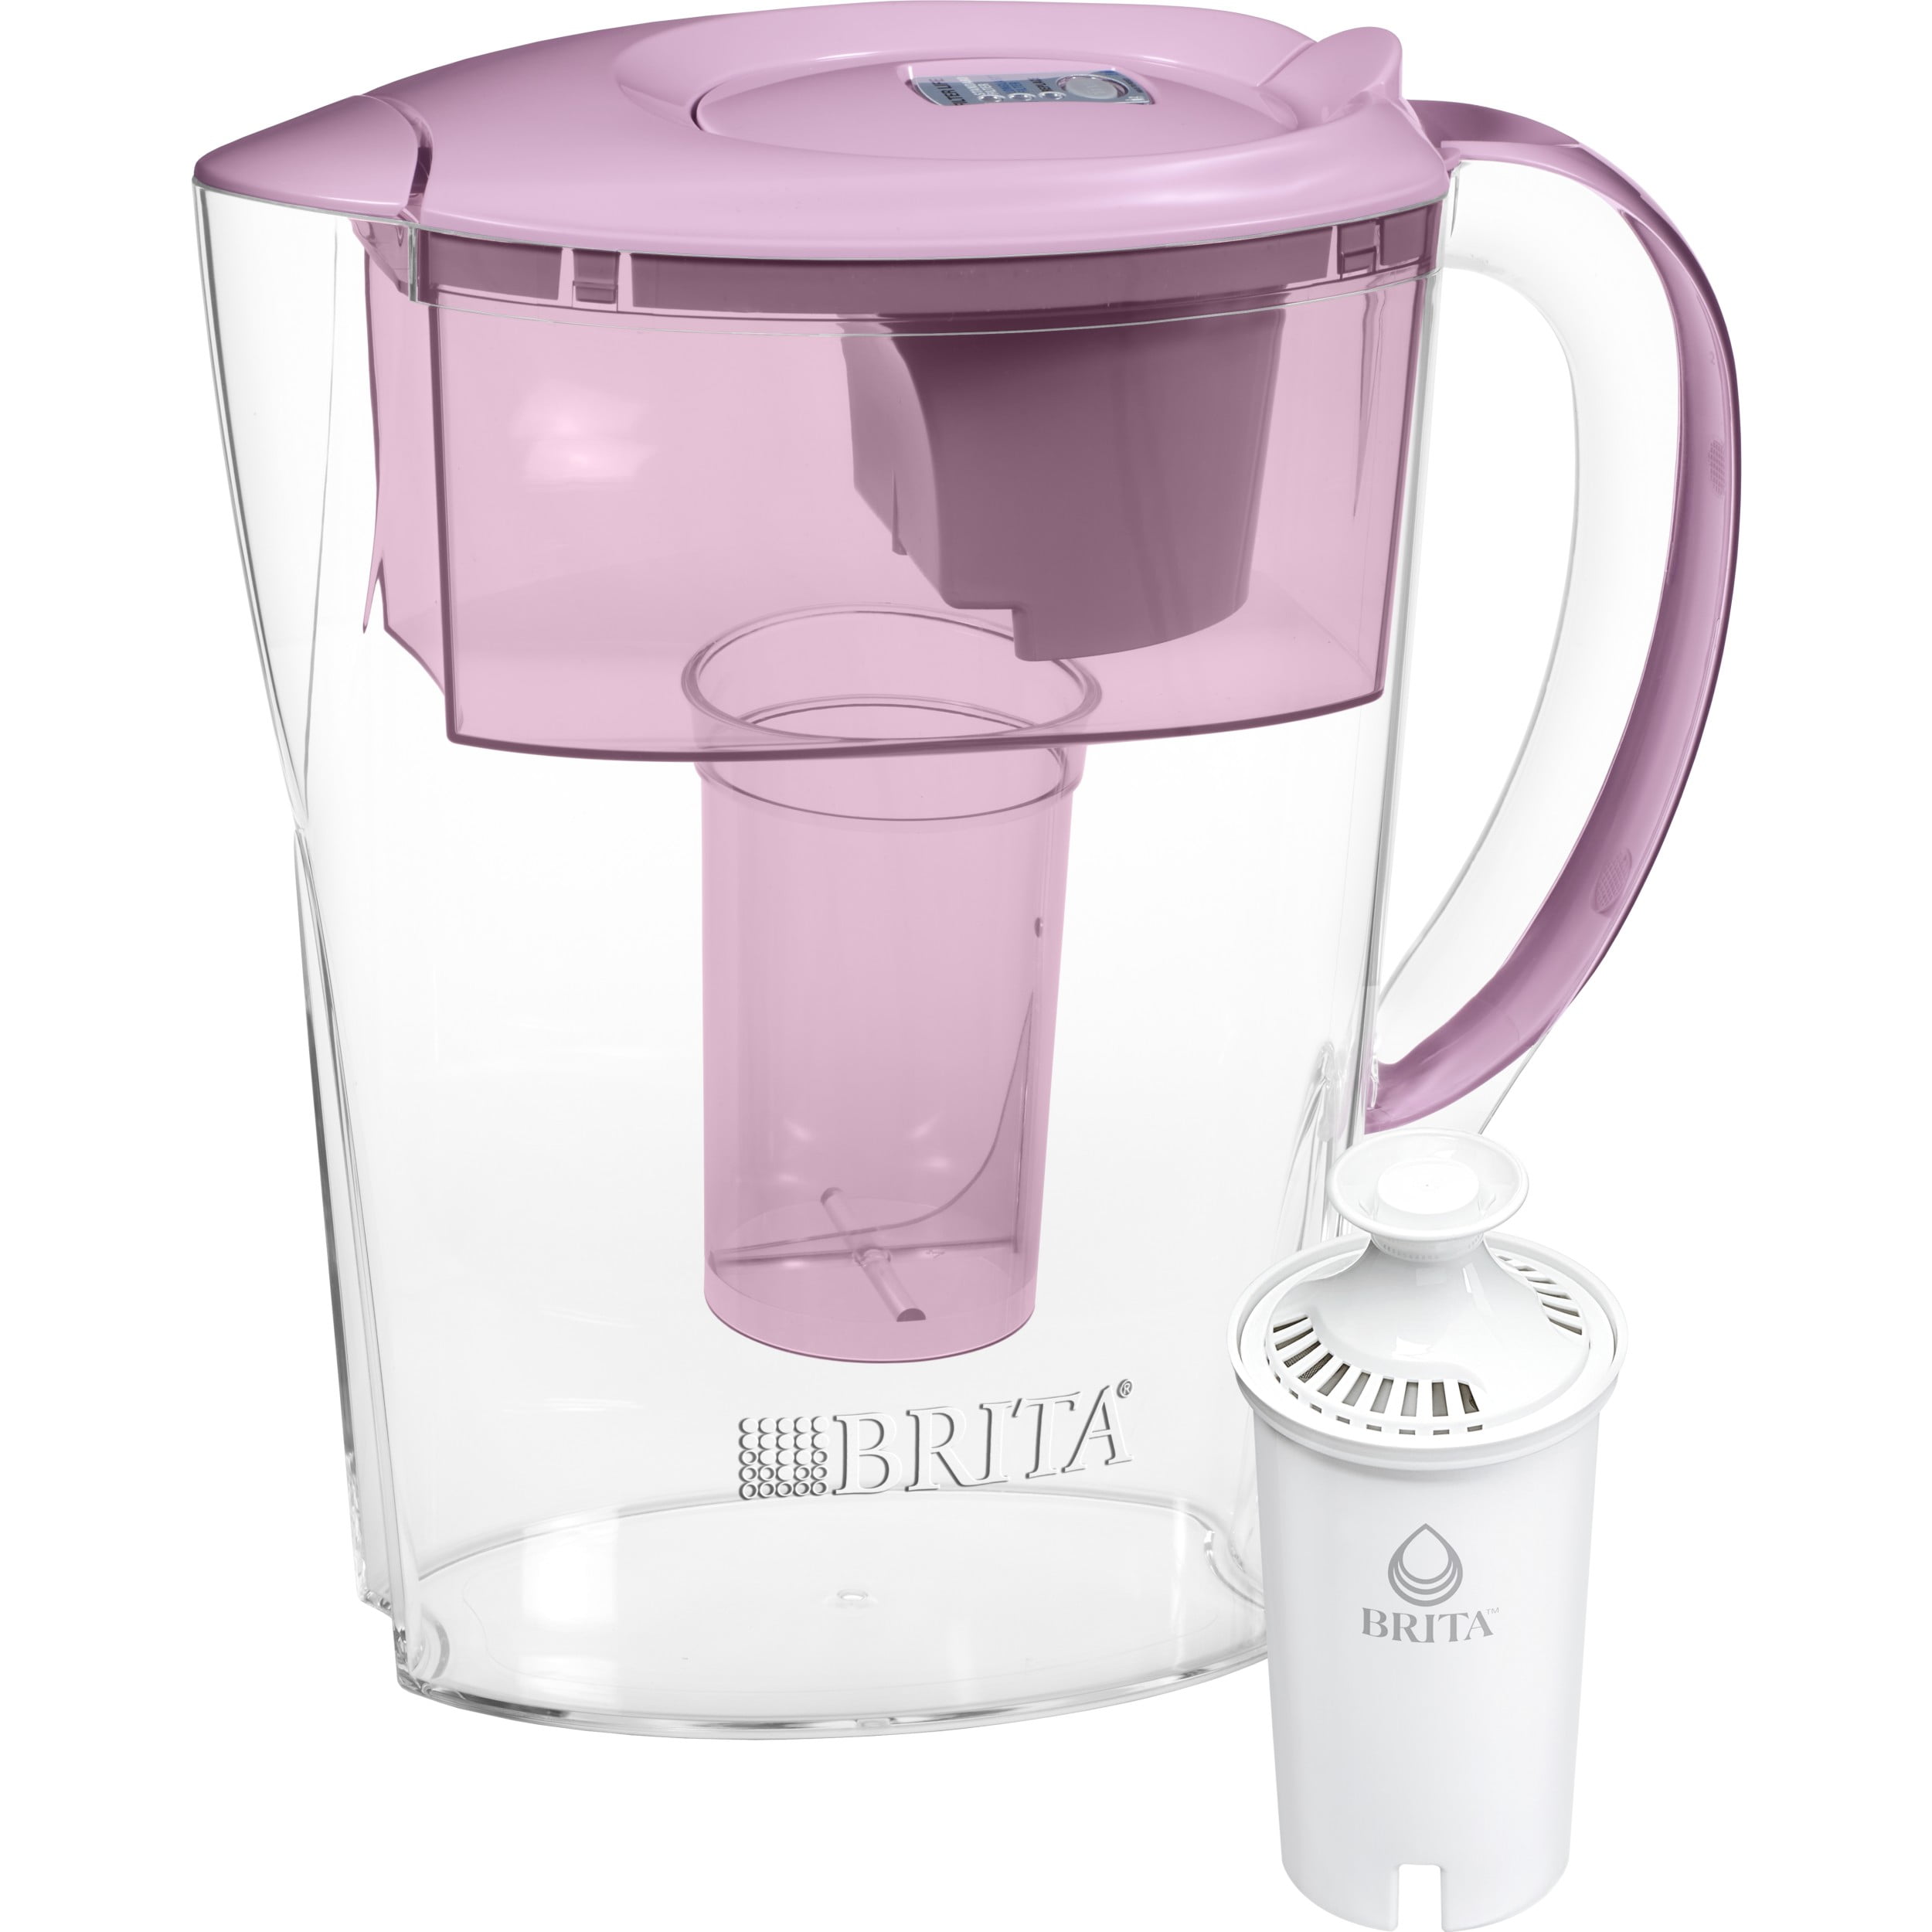 Brita Small 6 Cup Space Saver Water Filter Pitcher with 1 Standard Filter, Space Saver, Lilac